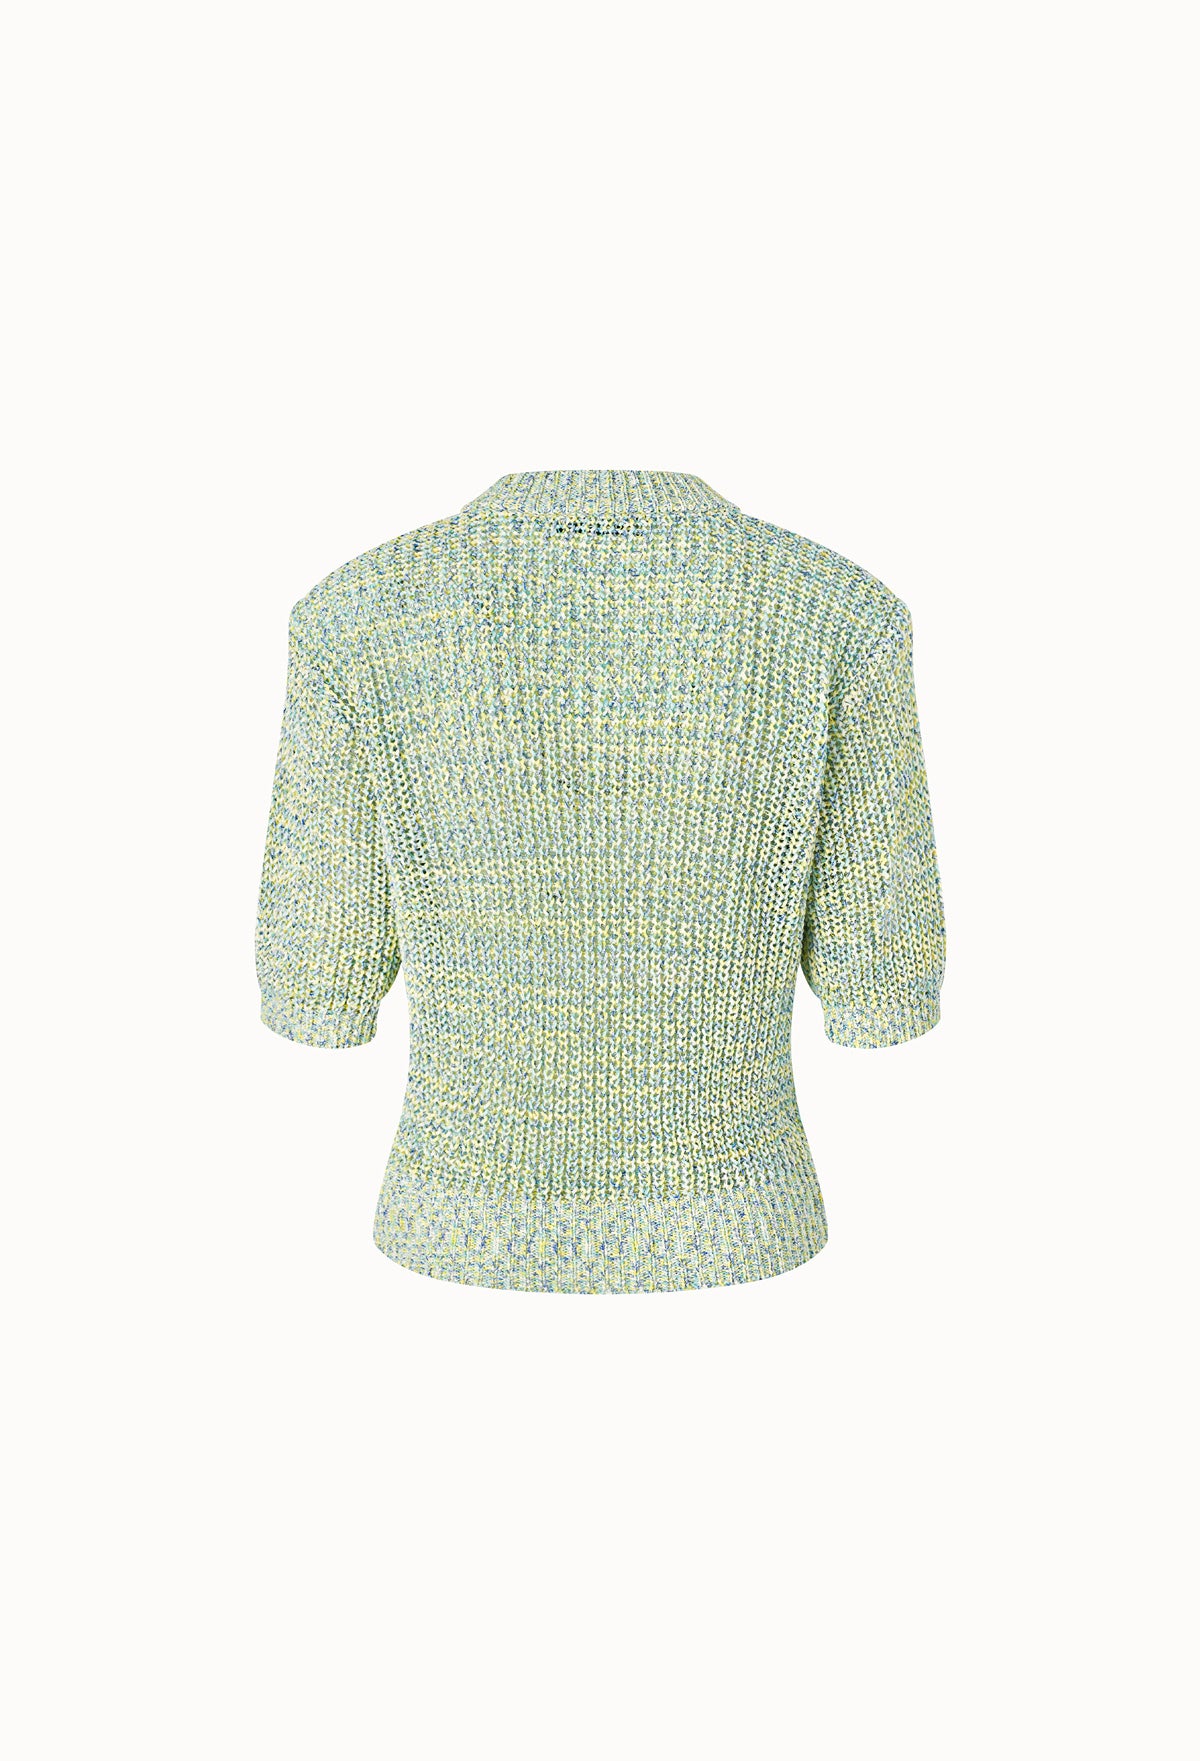 V-neck Waffle Knitted Top In Light Green